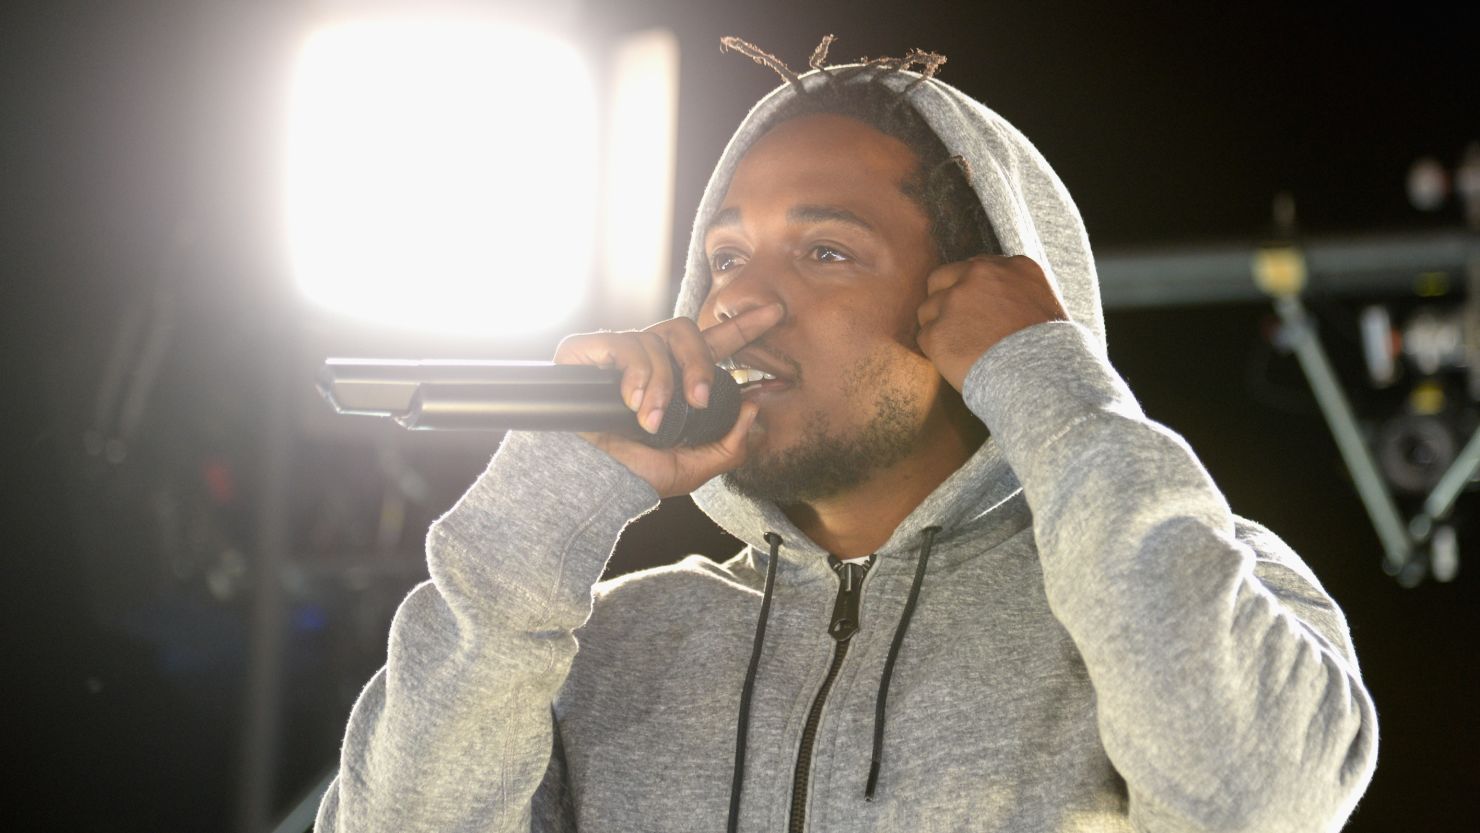 Kendrick Lamar's graduation gift to his sister was deemed not flashy enough by some.